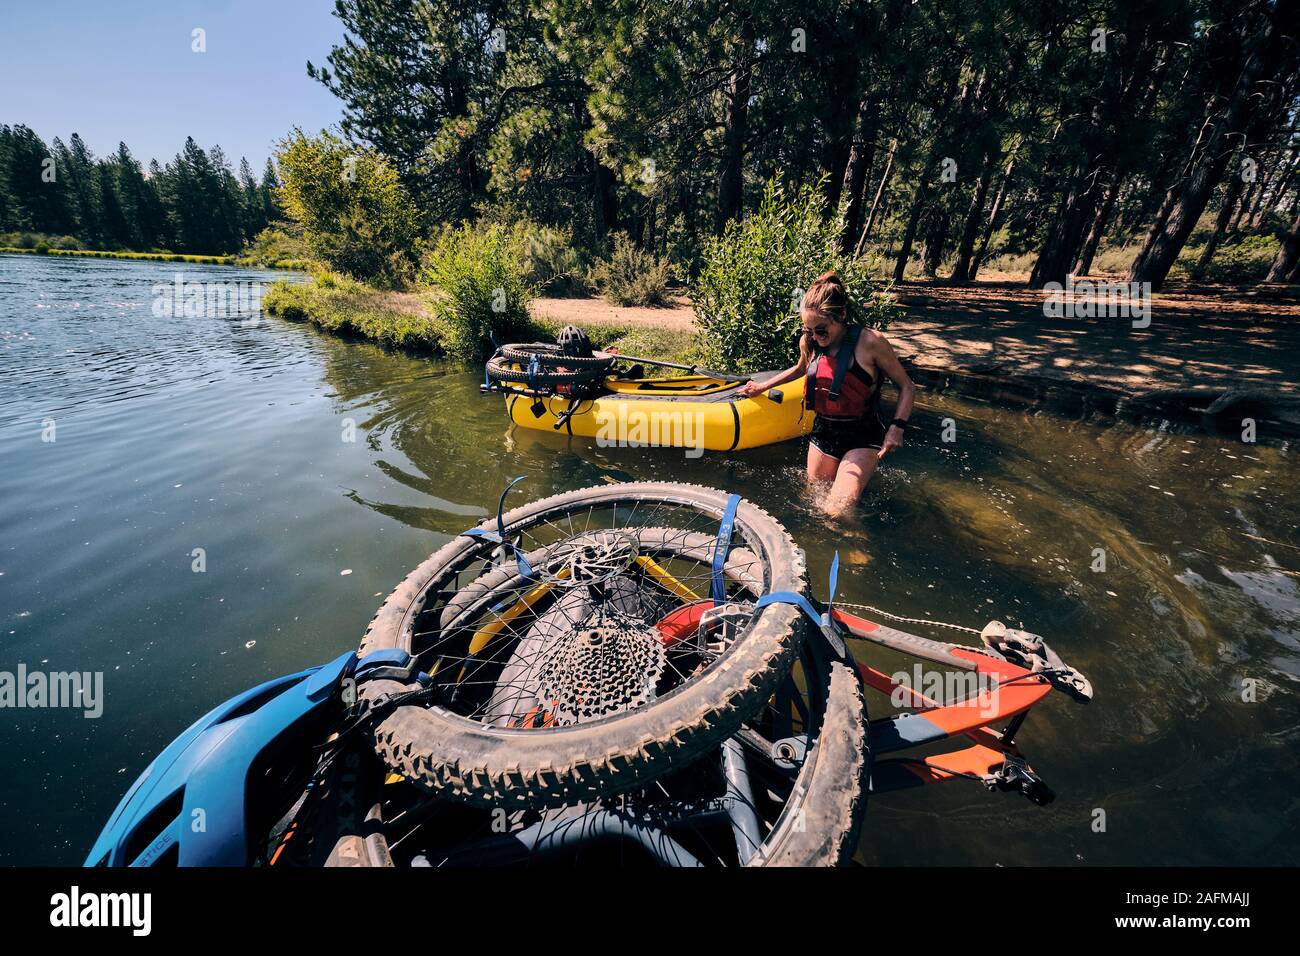 Woman jumps from her pack raft into the Deschutes River to cool off. Stock Photo